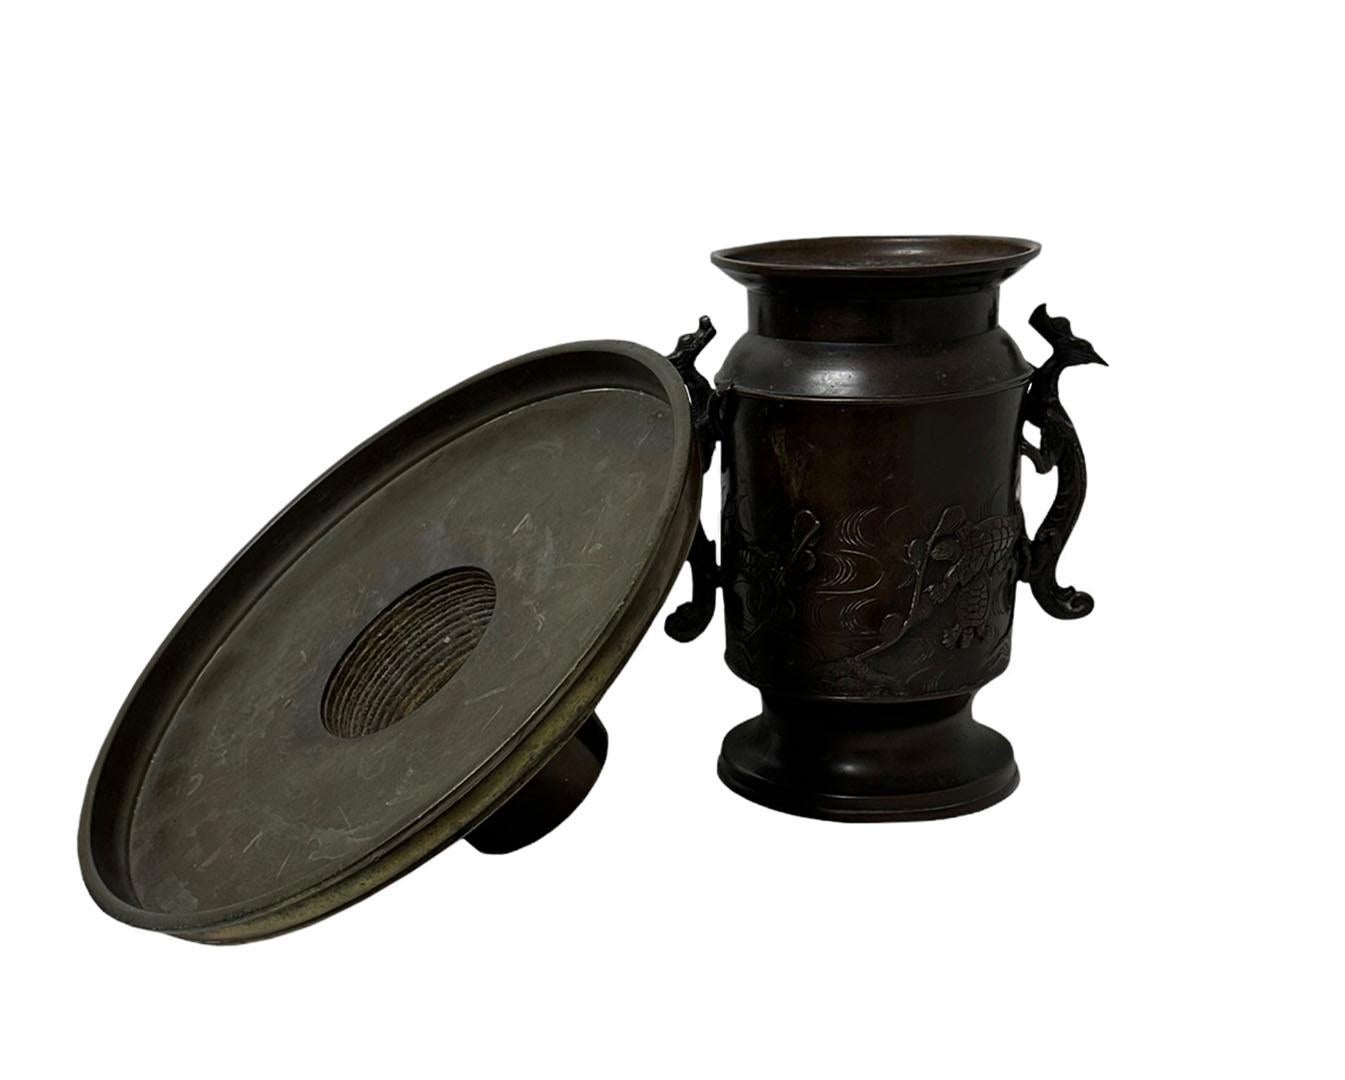 Japanese bronze usabata flower arranging vessel probably late 19th century bronze with a dark brown patina. The top is five and a half inches in diameter and comes off.